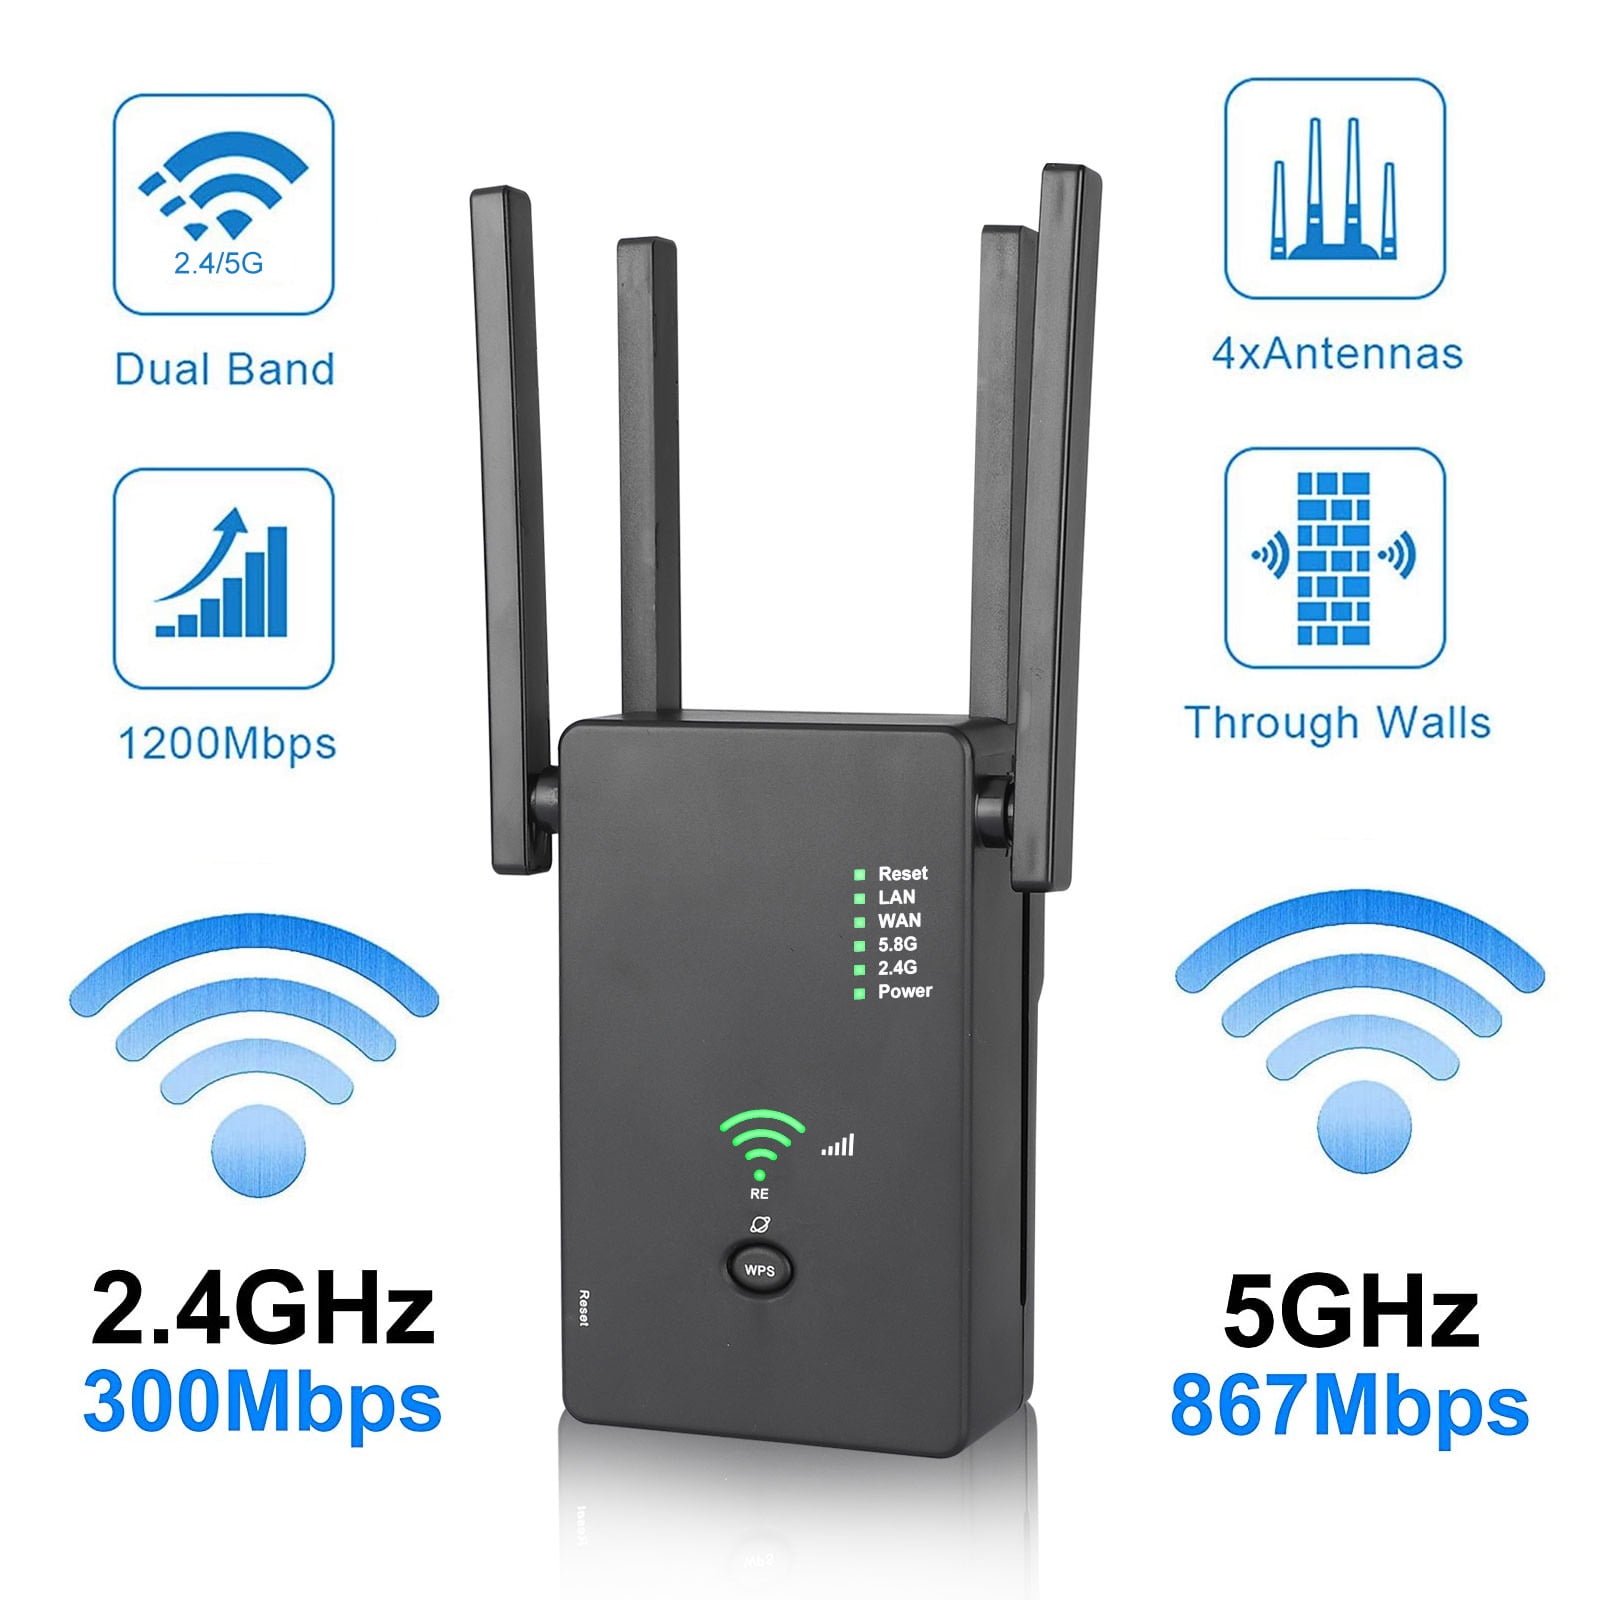 Wireless Internet Repeater with Ethernet Port and Access Point WiFi Extenders Signal Booster for Home,WiFi Booster and Signal Amplifier,WiFi Range Extender 1200Mbps,up to 3000 Sq.ft Full Coverage 